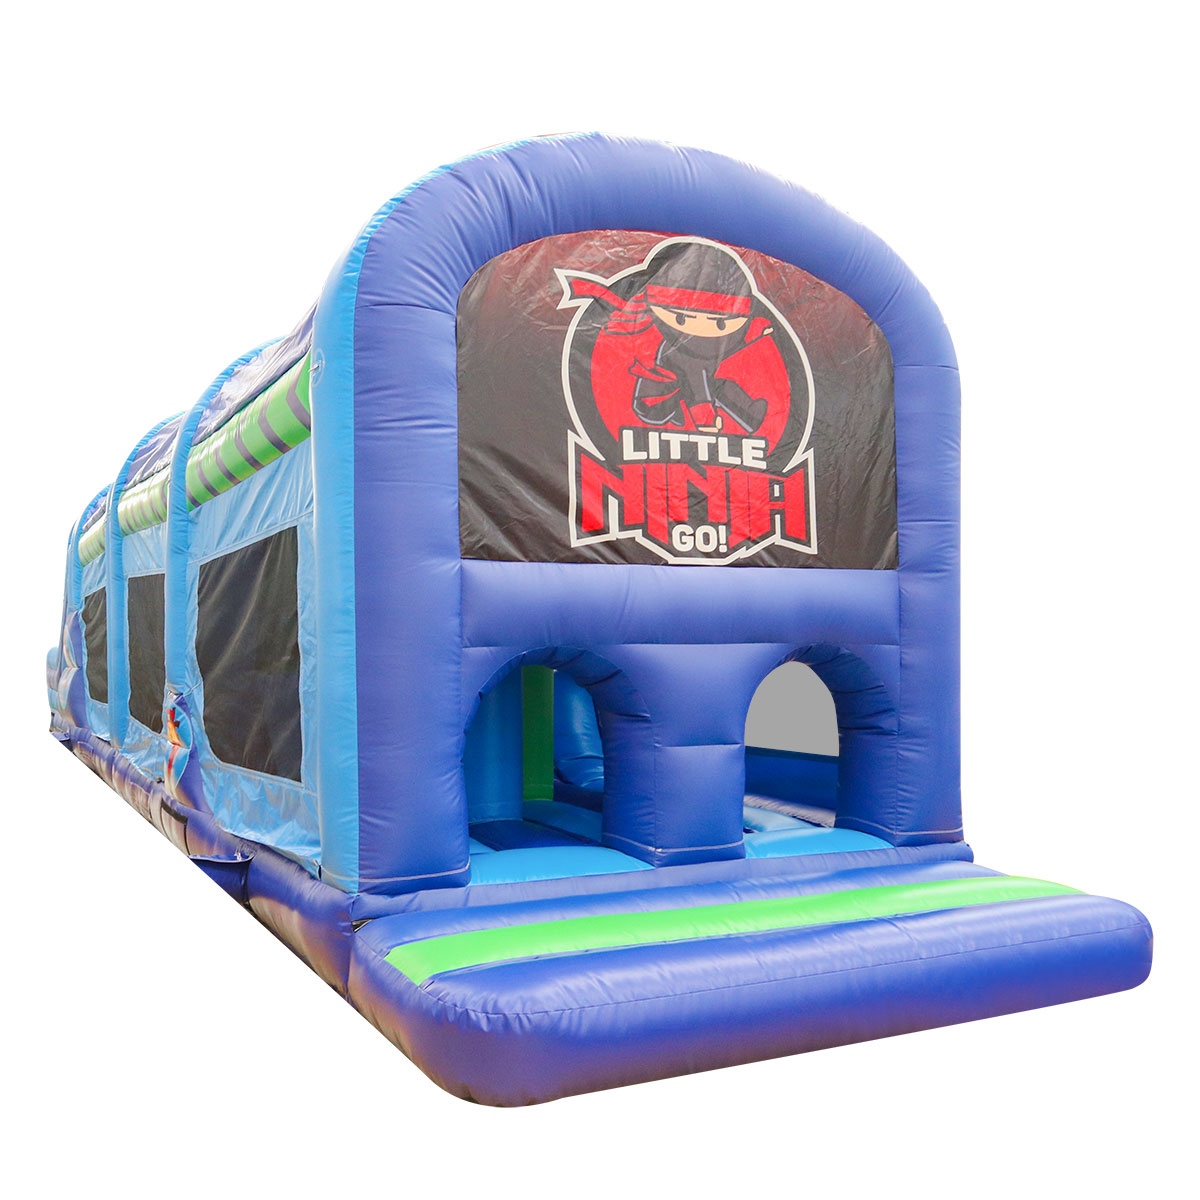 Inflatable cartoon obstacle courseYGO63